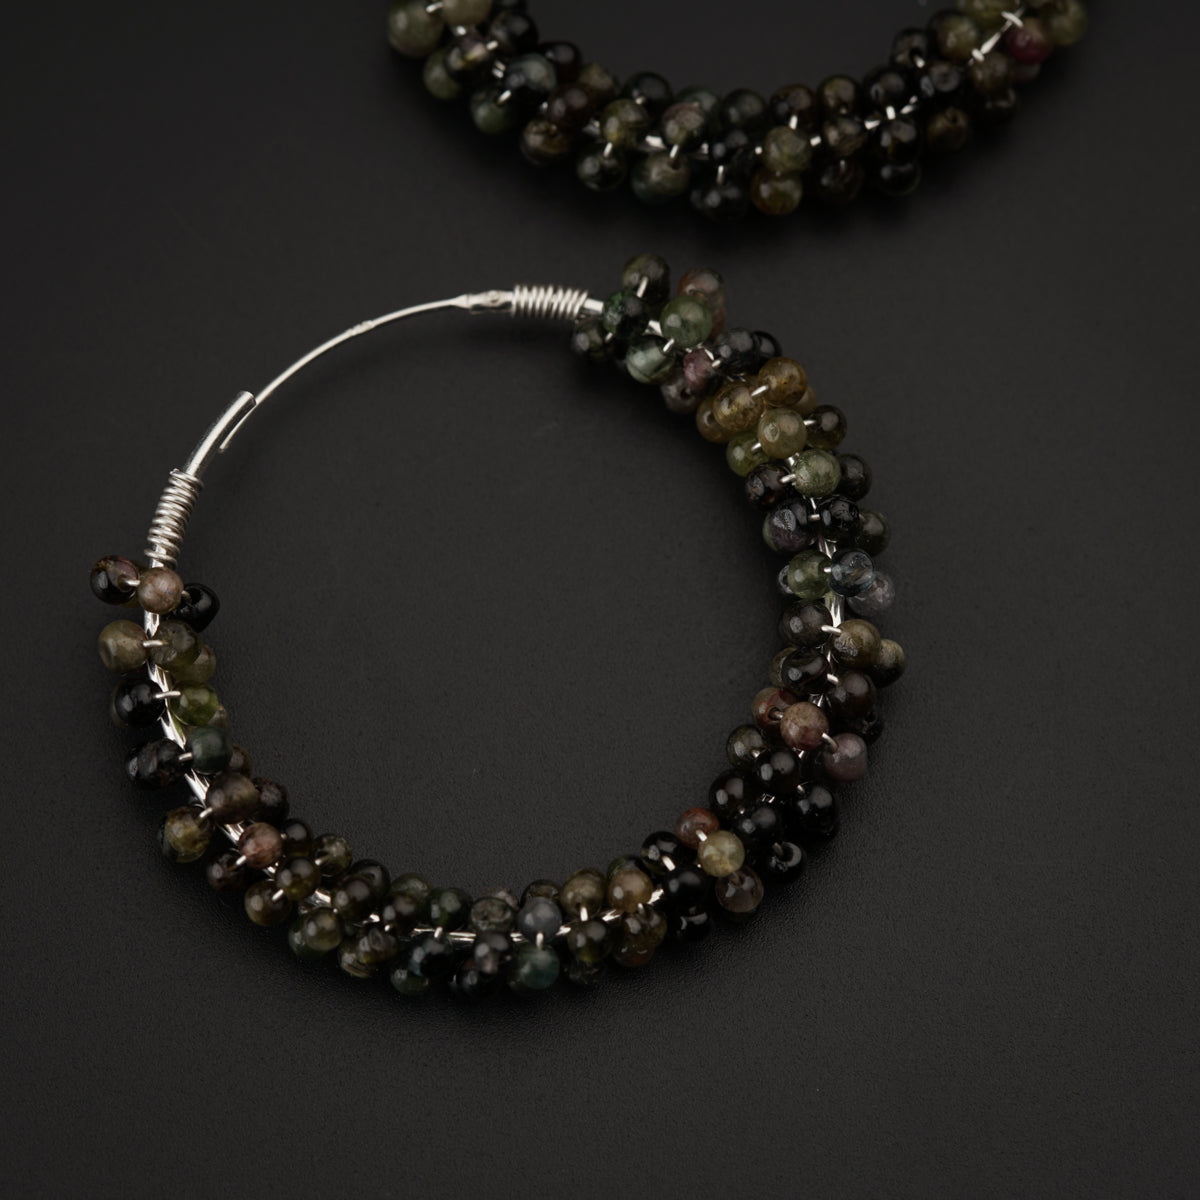 a pair of bracelets with beads on a black surface